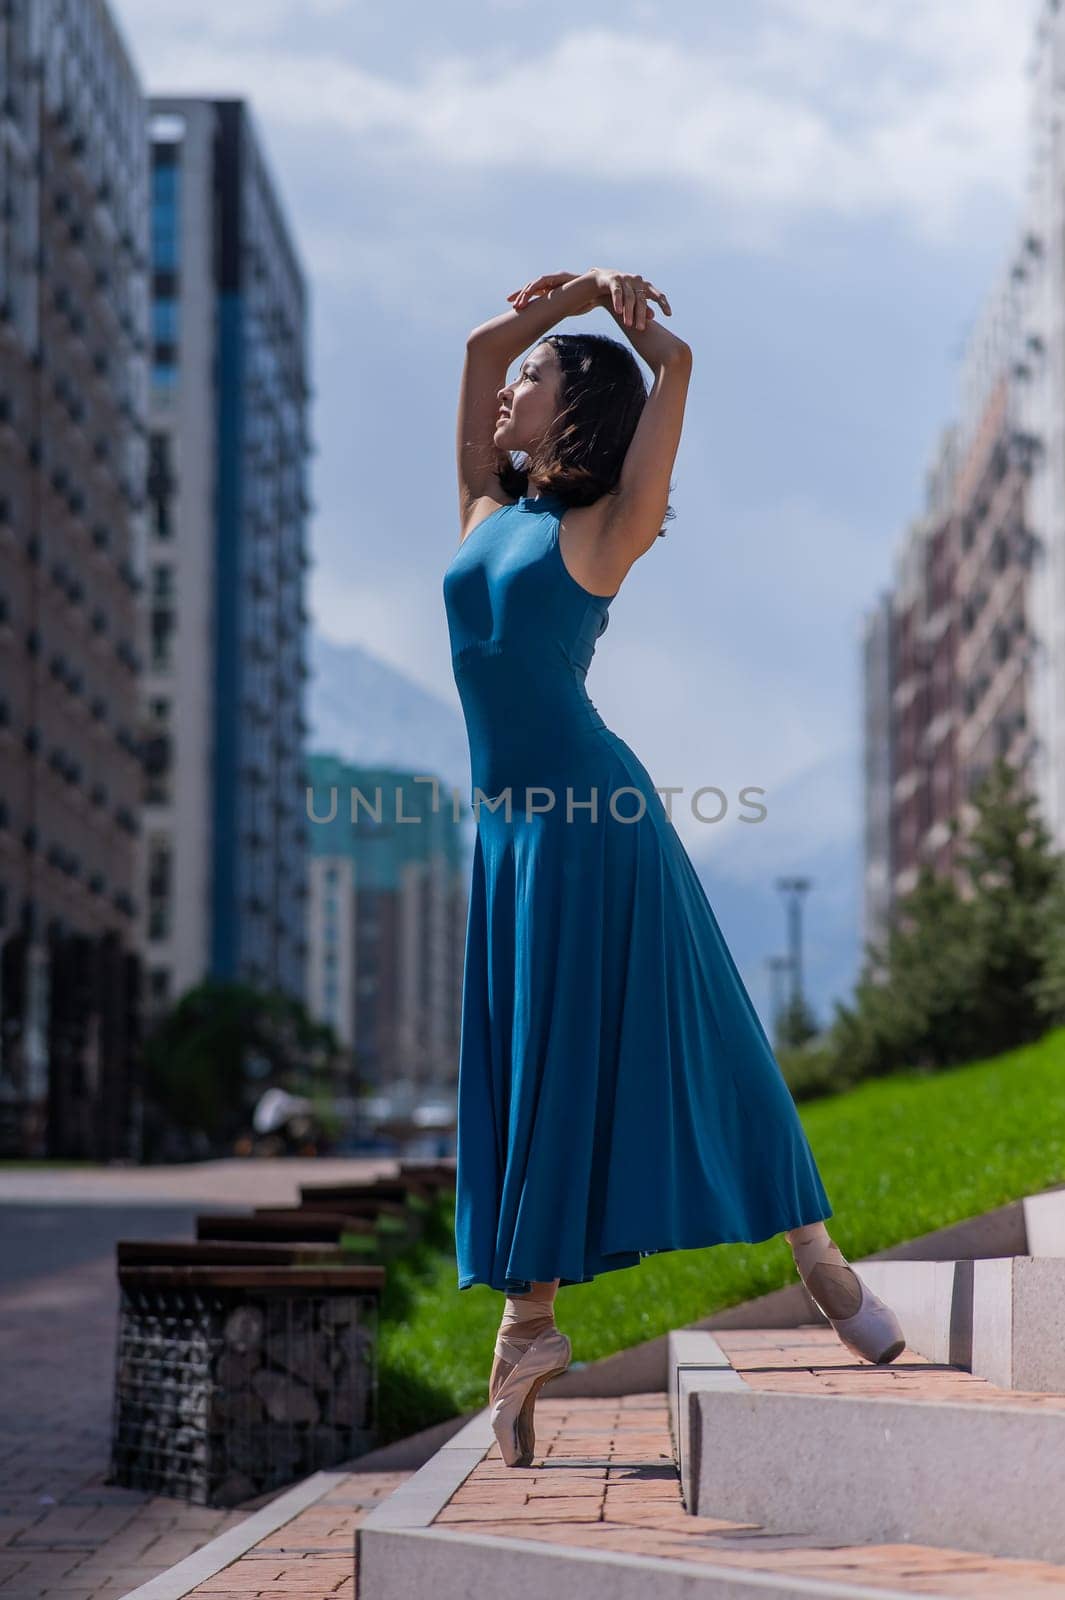 Beautiful Asian ballerina in blue dress posing on stairs outdoors. Urban landscape